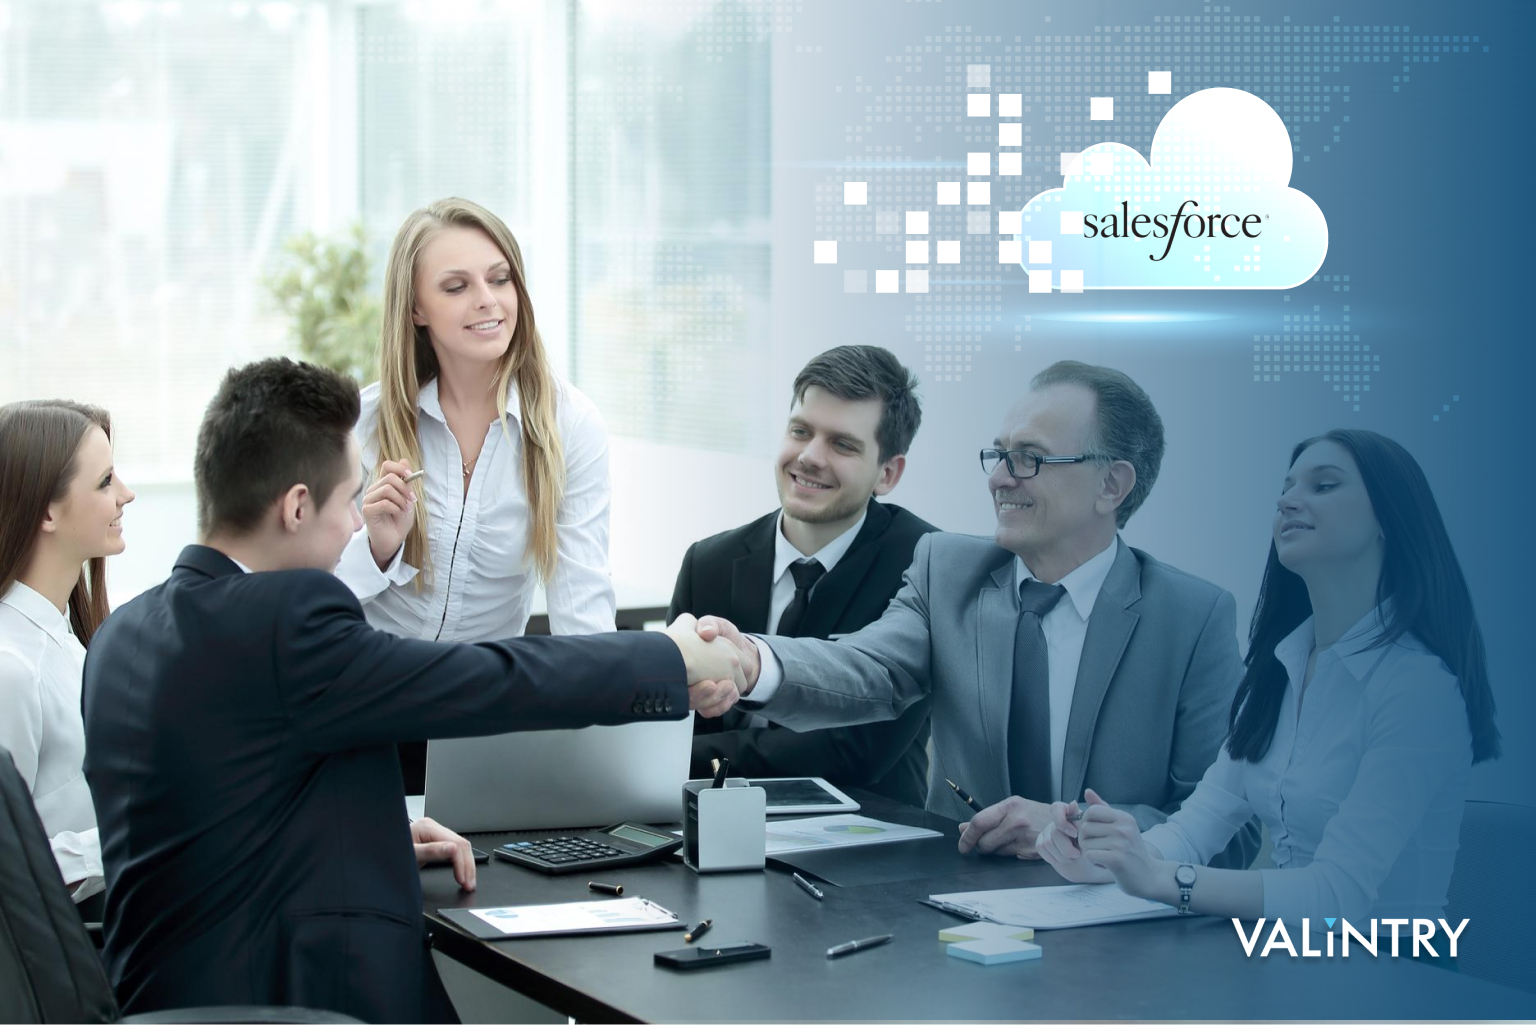 What Are the Key Features of a Salesforce Recruiting Agency